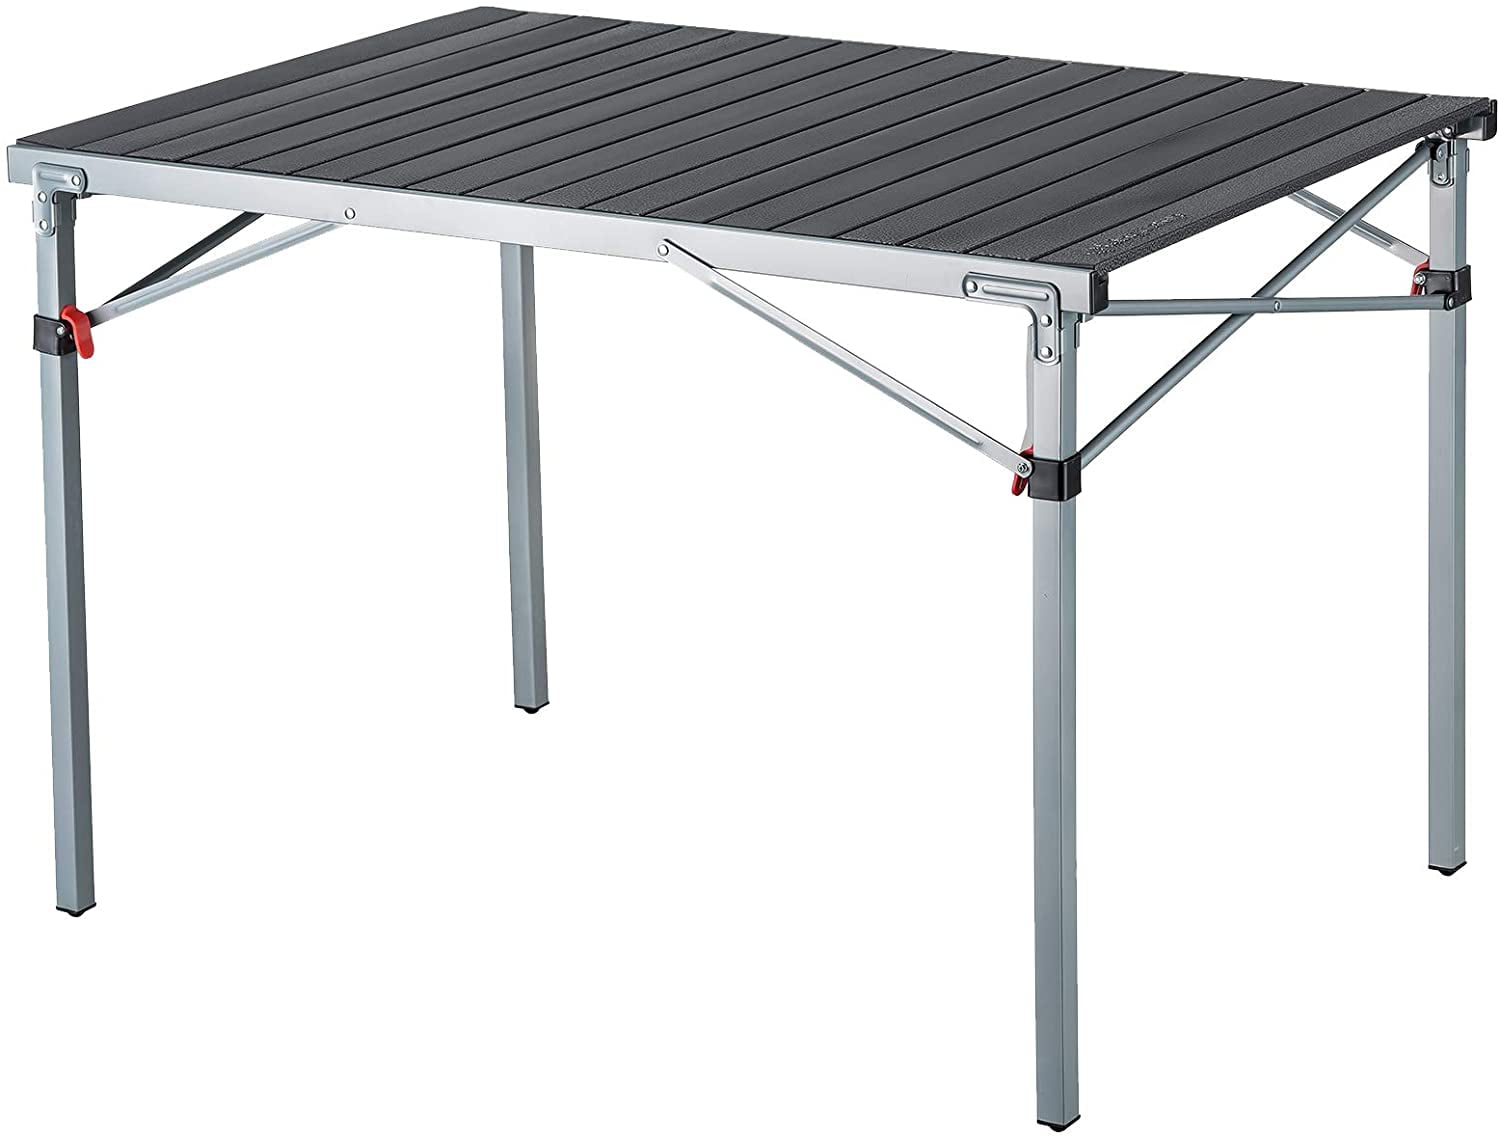 Large Folding Table Portable Picnic Tabel For 4-6 Person Lightweight For Camping 